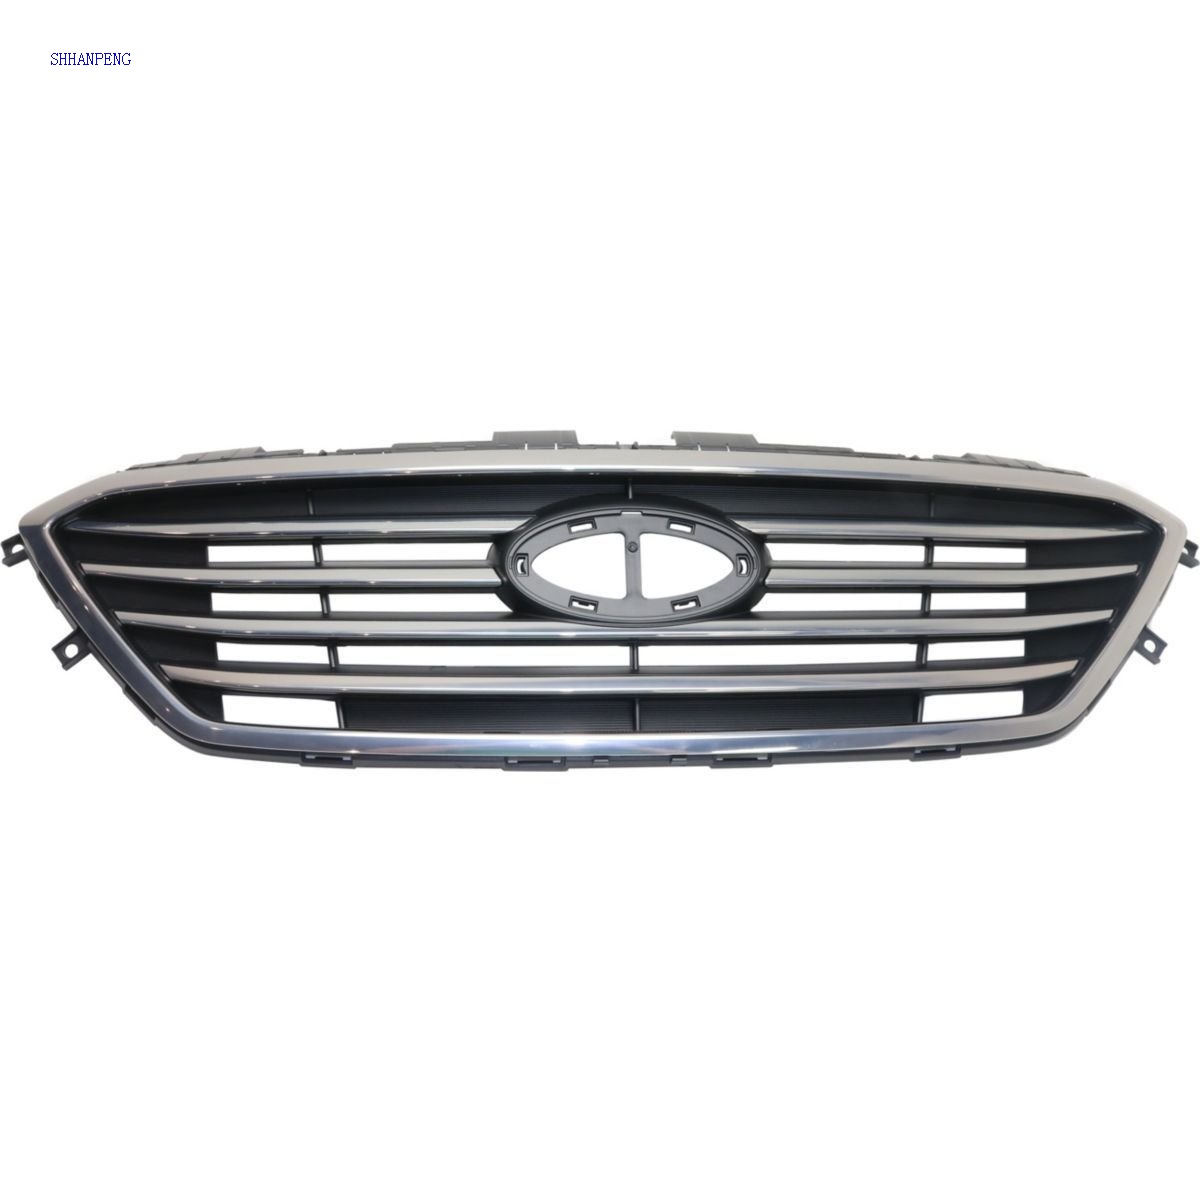 Grille Grill Front CHROME MOULDING With Black Insert For Hyundai Sonata HY1200174